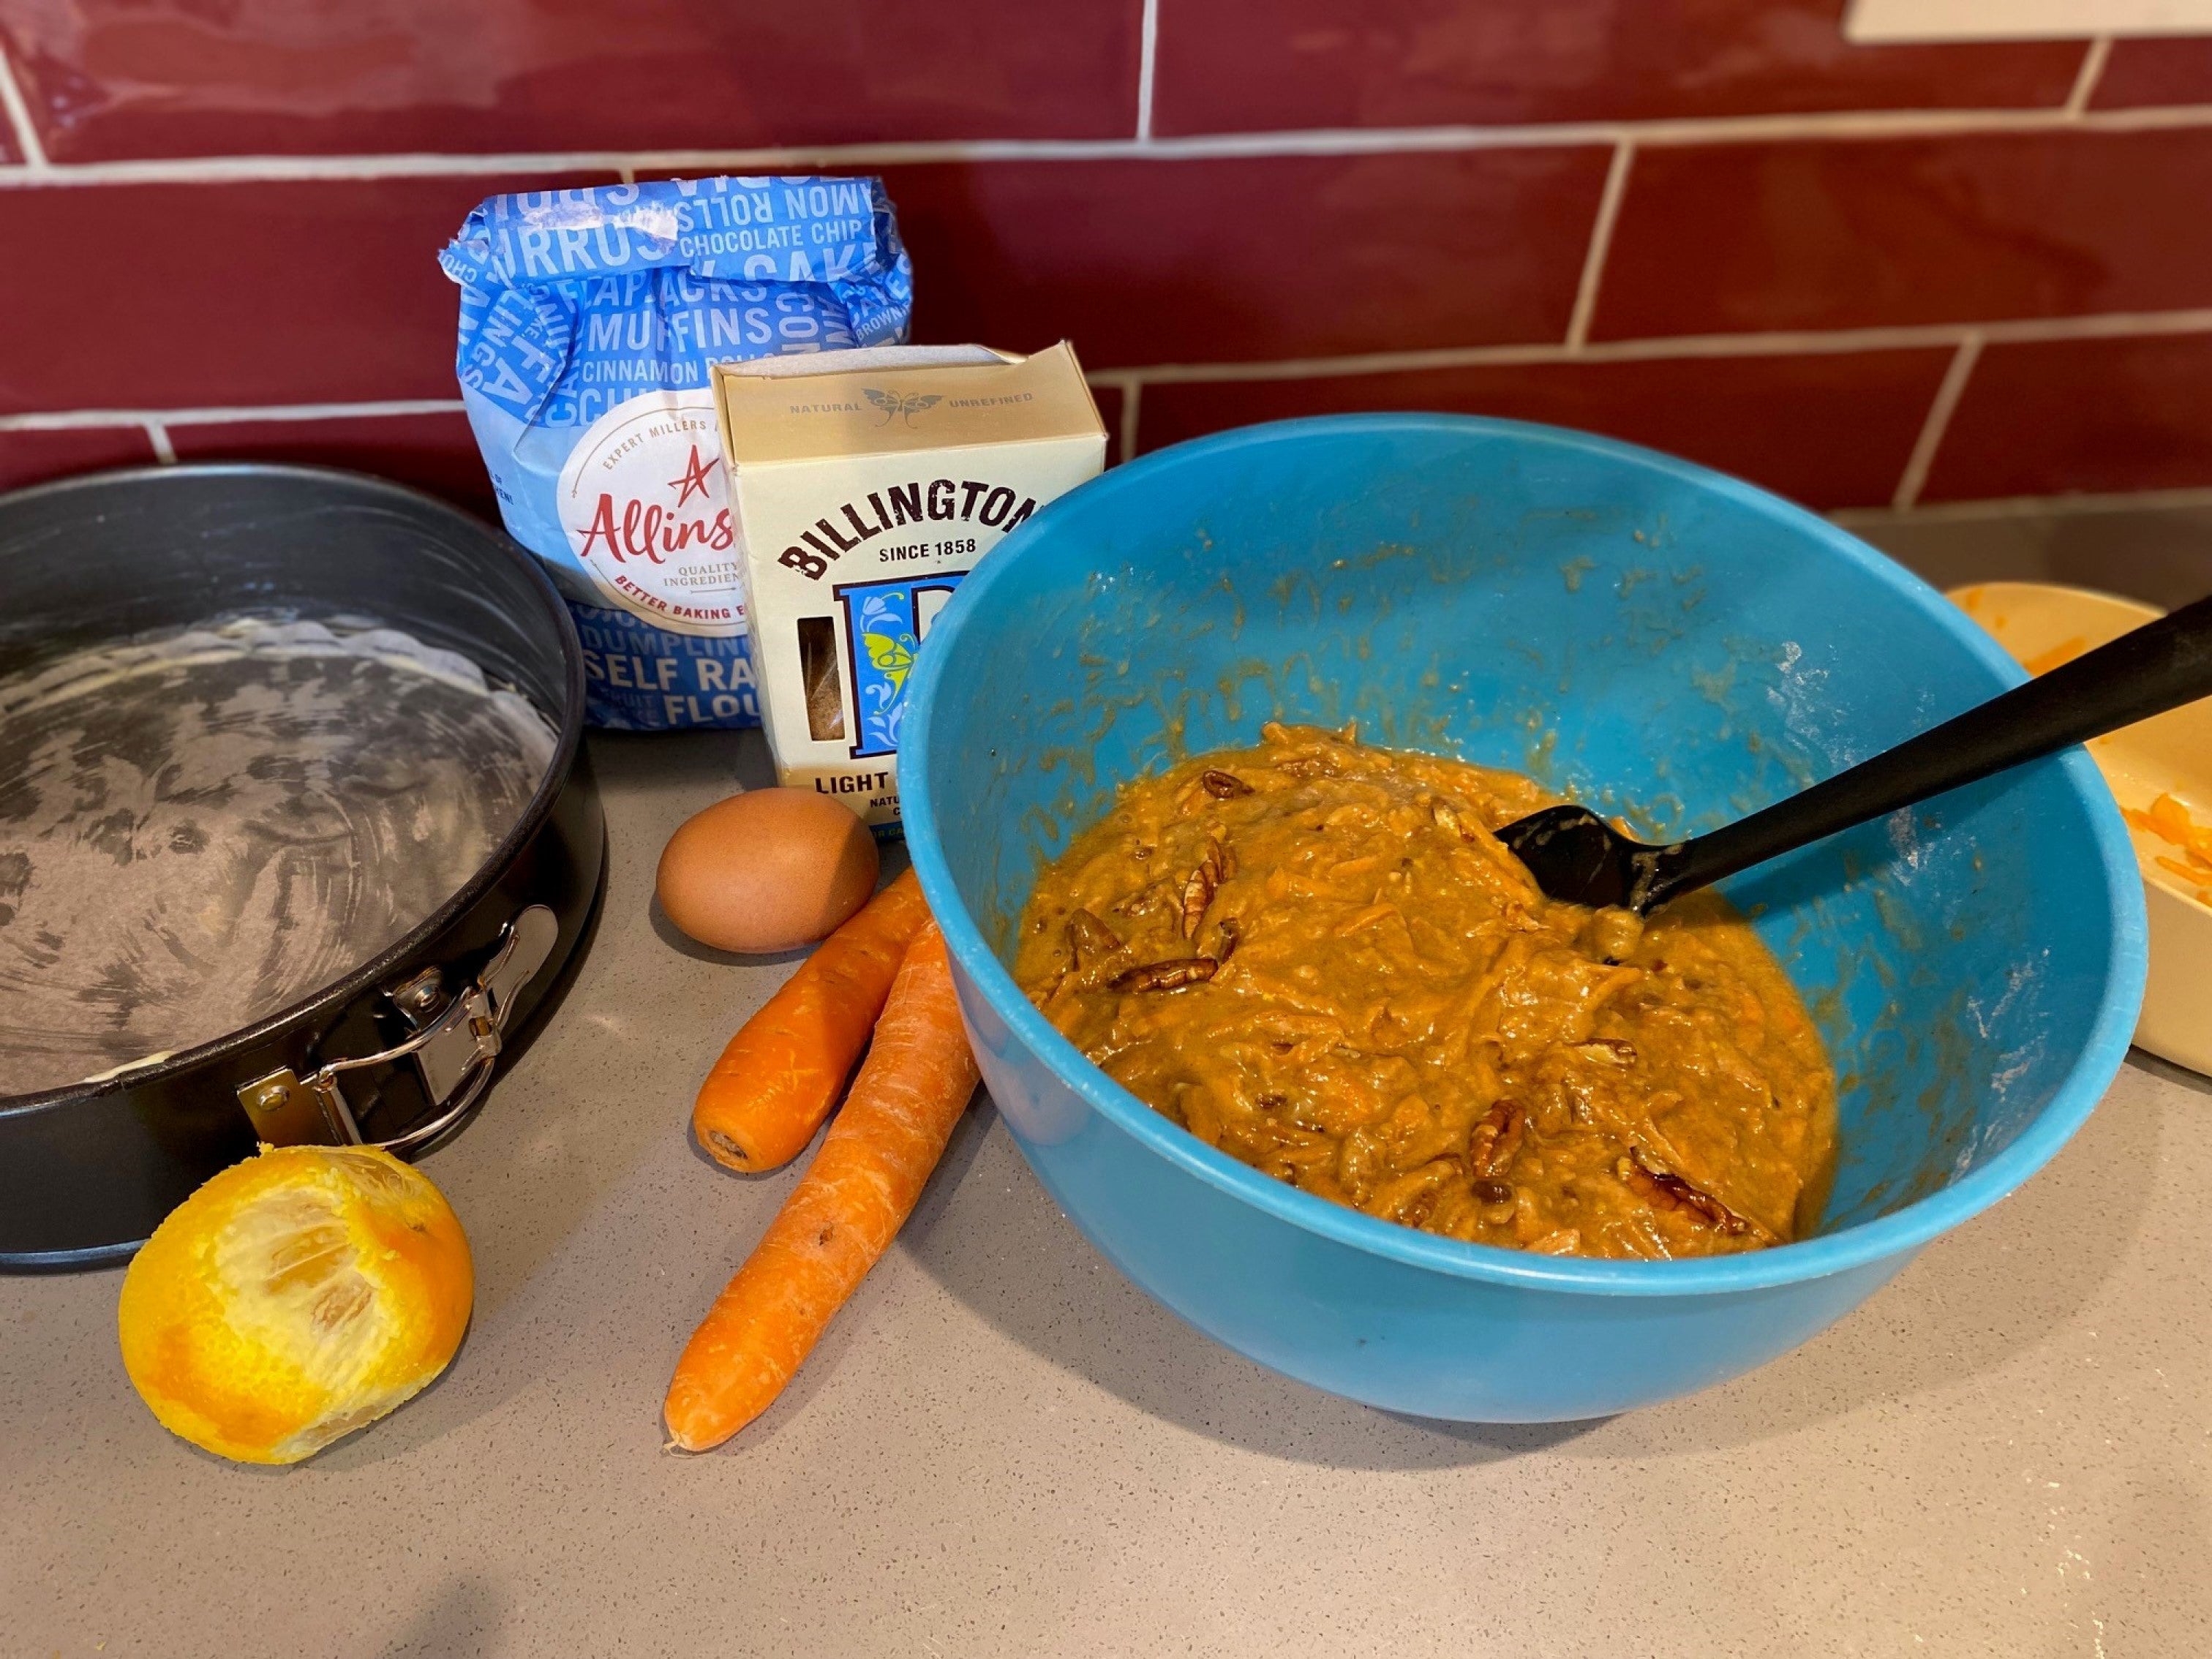 Mixing the ingredients for Paul Hollywood's carrot cake in a blue bowl